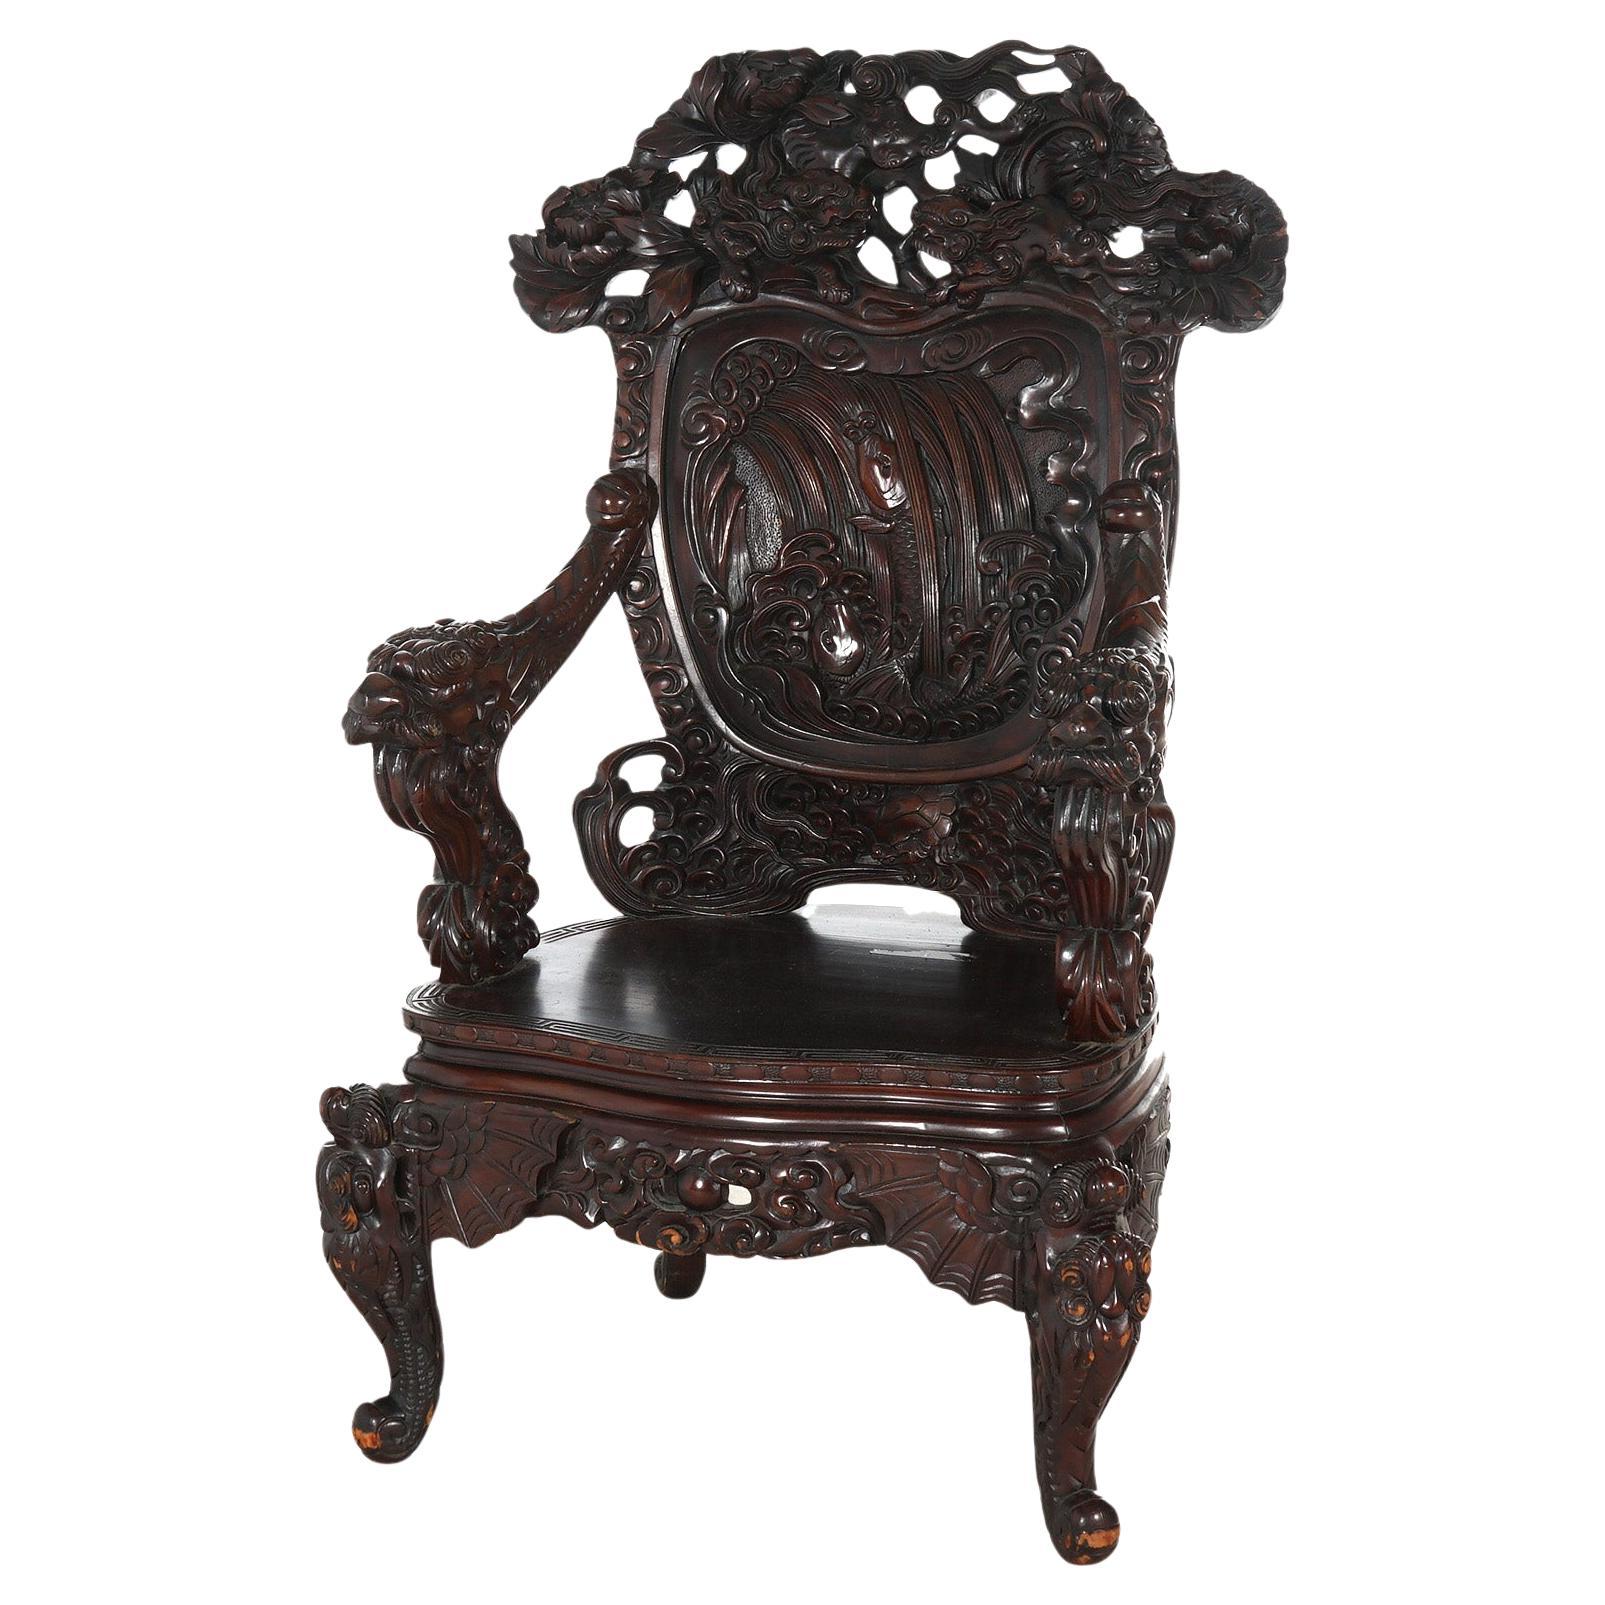 Antique Chinese Deep Carved Rosewood Figural King Throne Chair with Dragons 1920